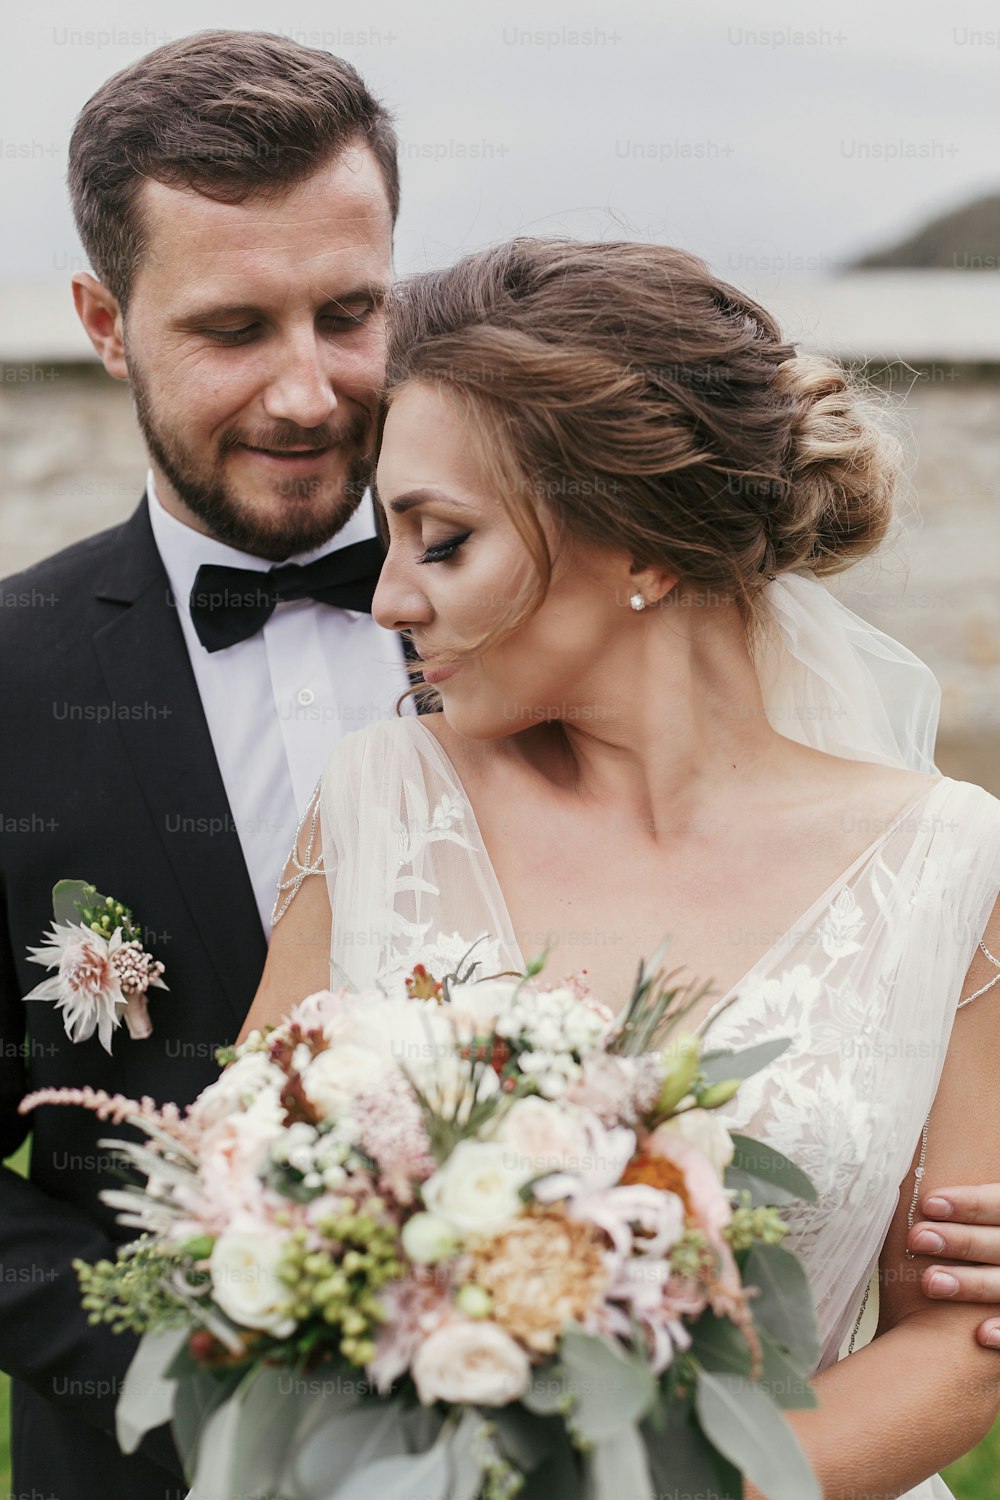 Gorgeous bride with modern bouquet and stylish groom gently hugging and smiling outdoors. Sensual wedding couple embracing. Romantic moments of newlyweds. Wedding photo